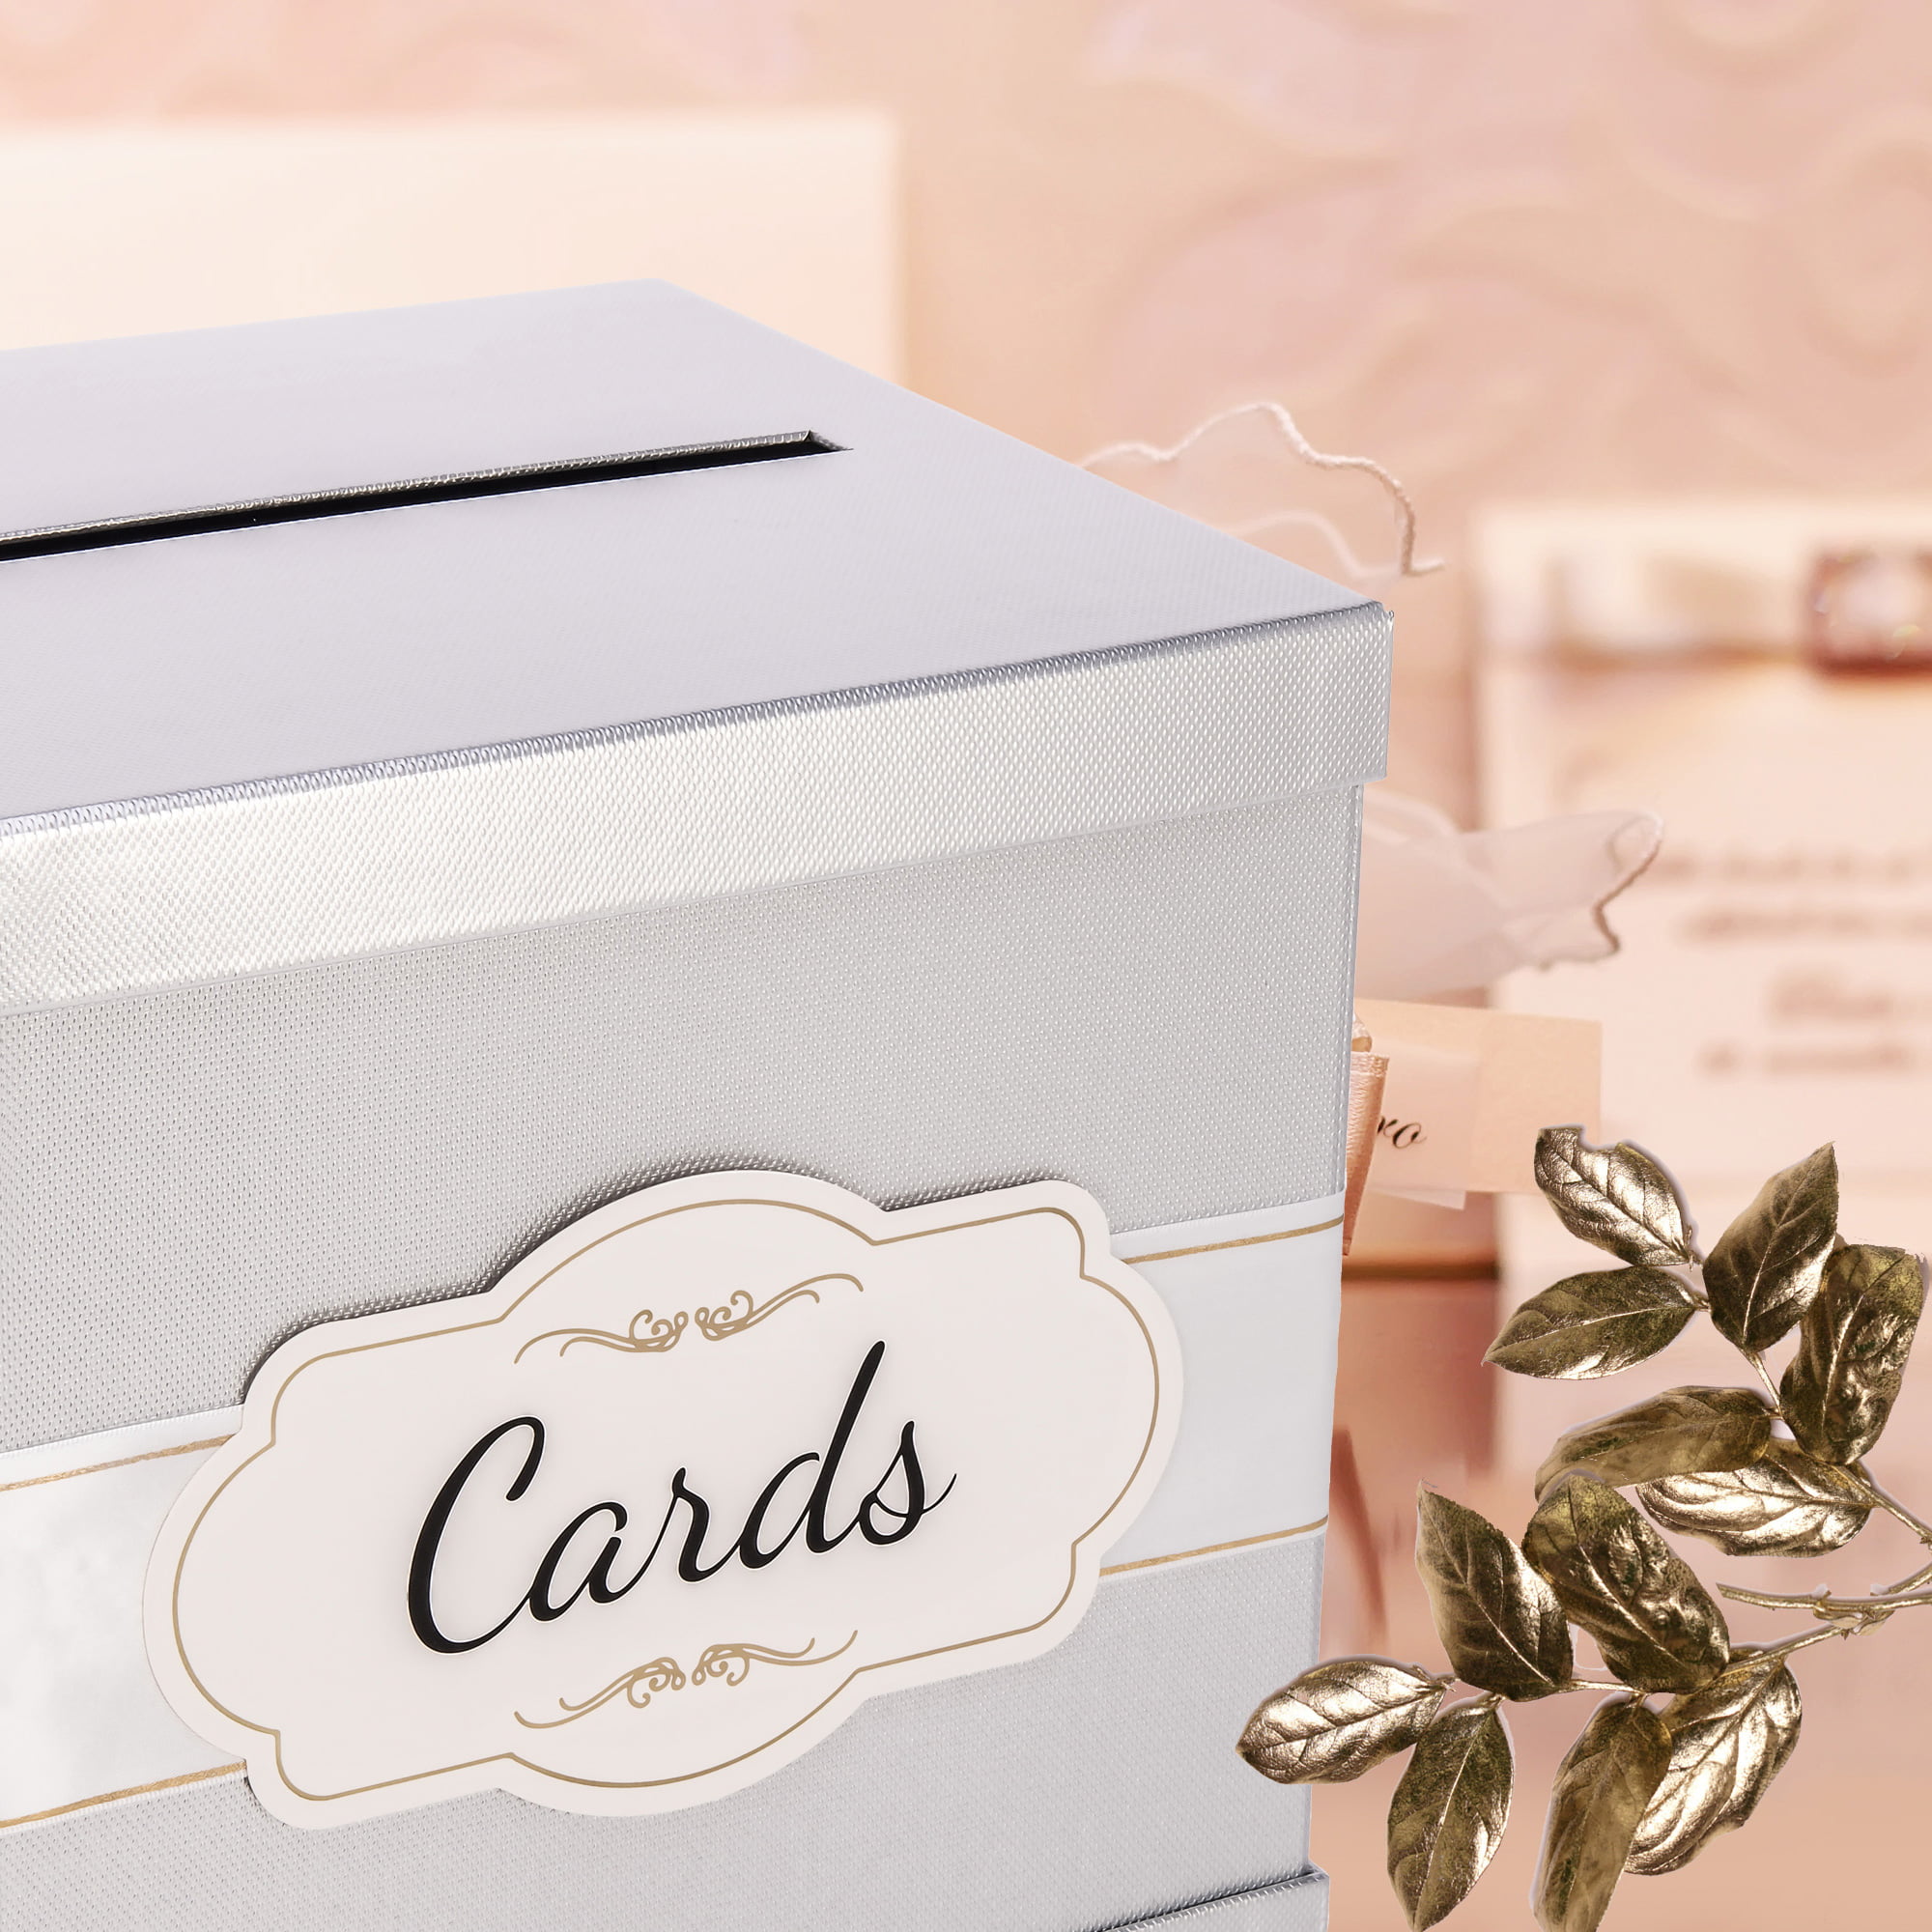 Gold Gift Card Box with White Lace and Cards Label – 10″ x 10″